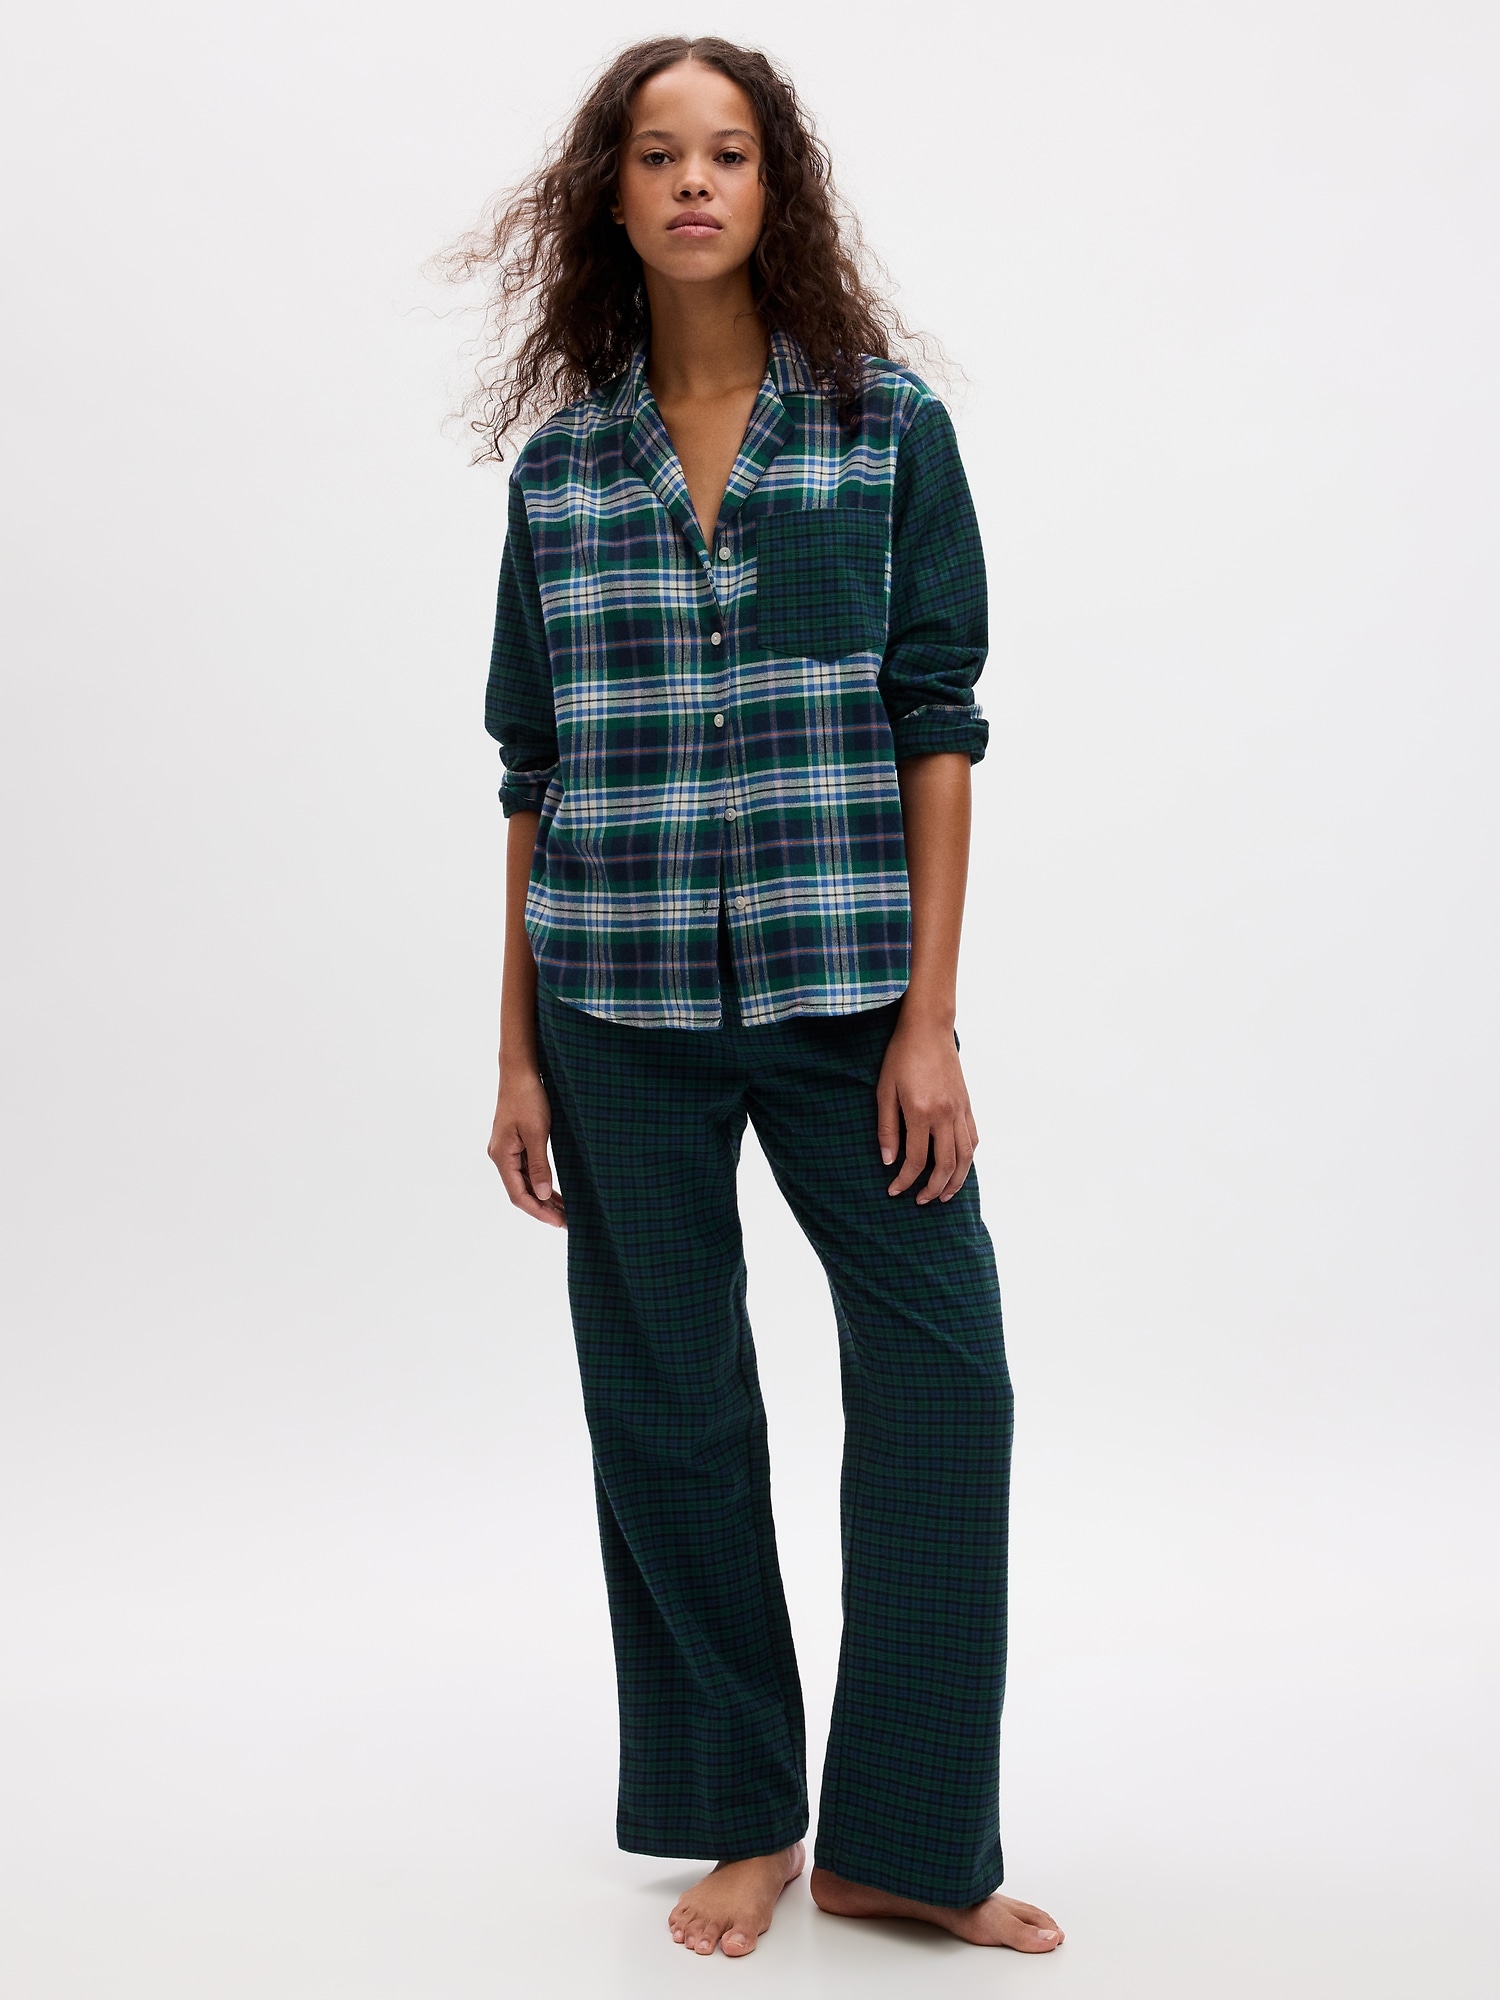 Women's Pajamas - Footed, Flannel and more for Women